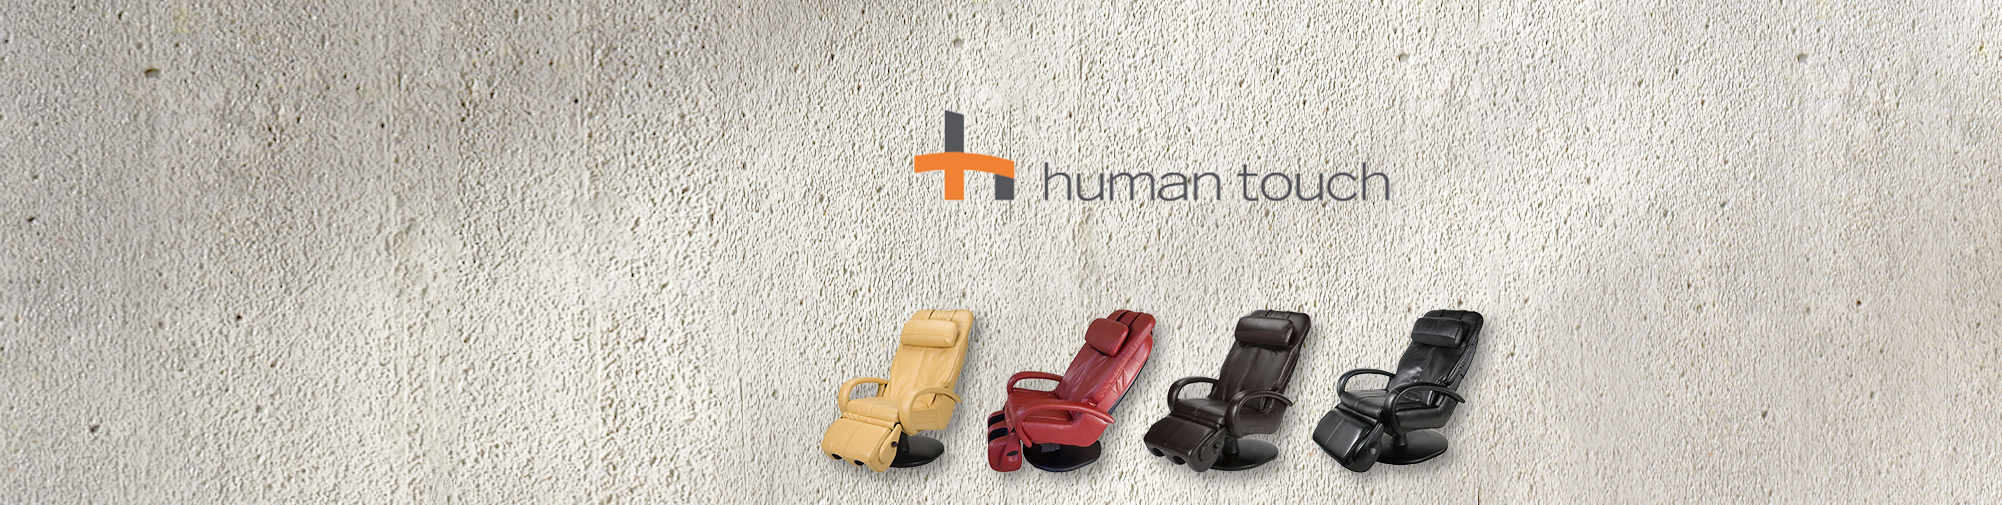 Human Touch - feel, perform and live your best | Massage Chair World